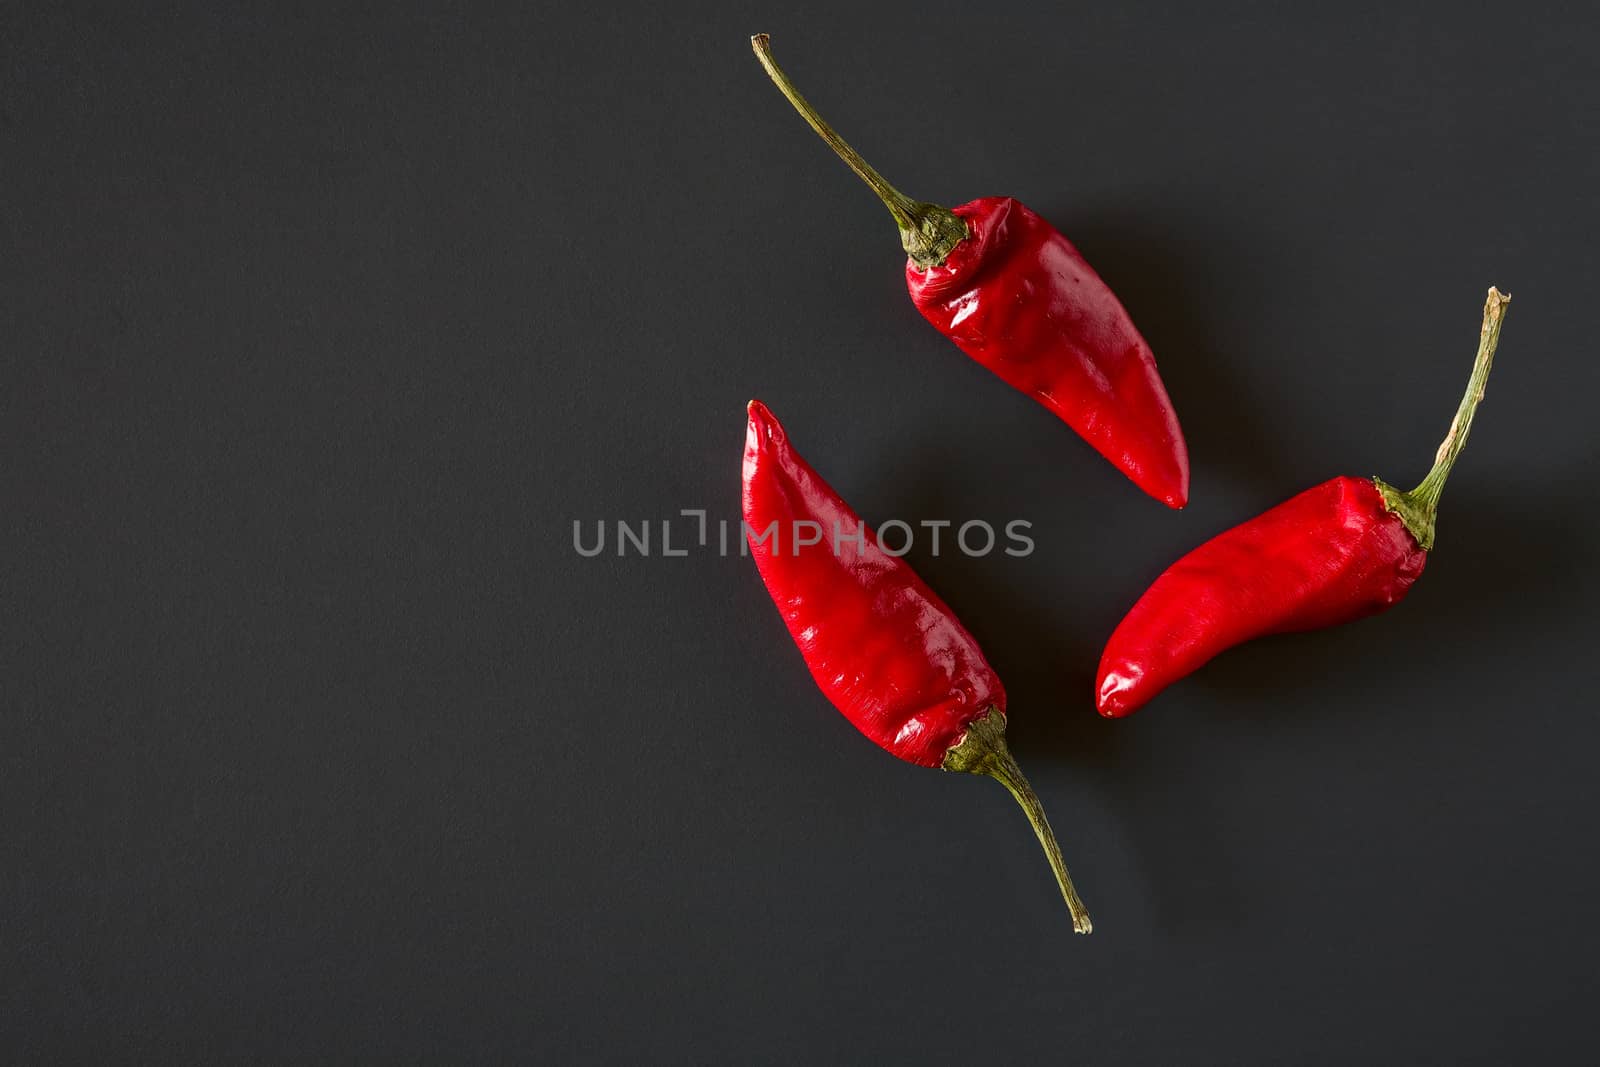 Red hot chili peppers over a dark background seen from above